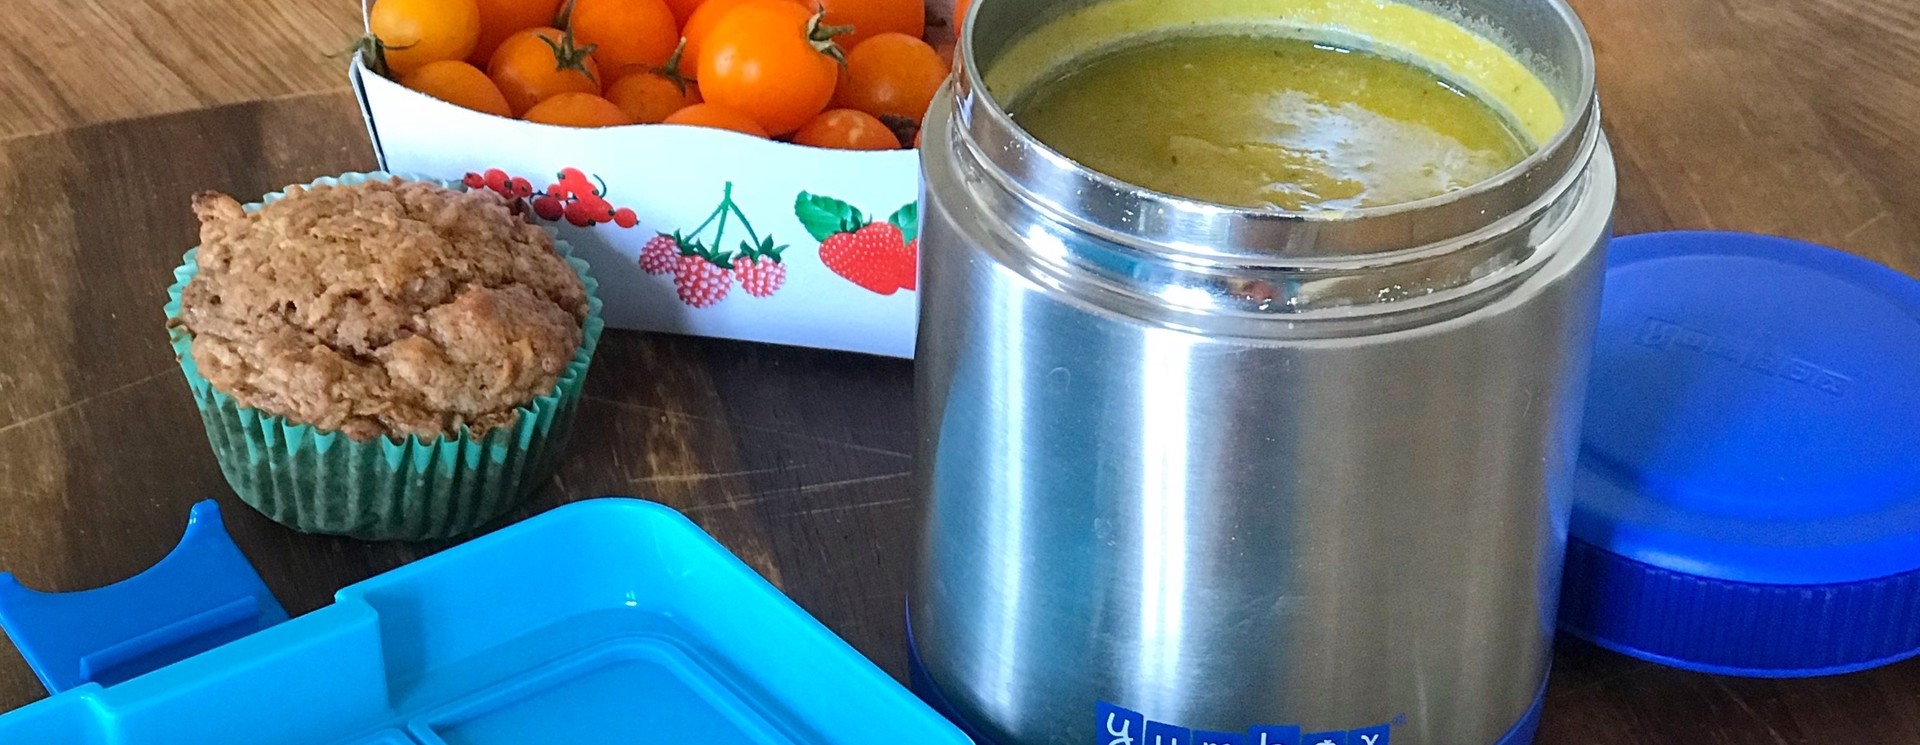 Thermos food containers for warm/cold food